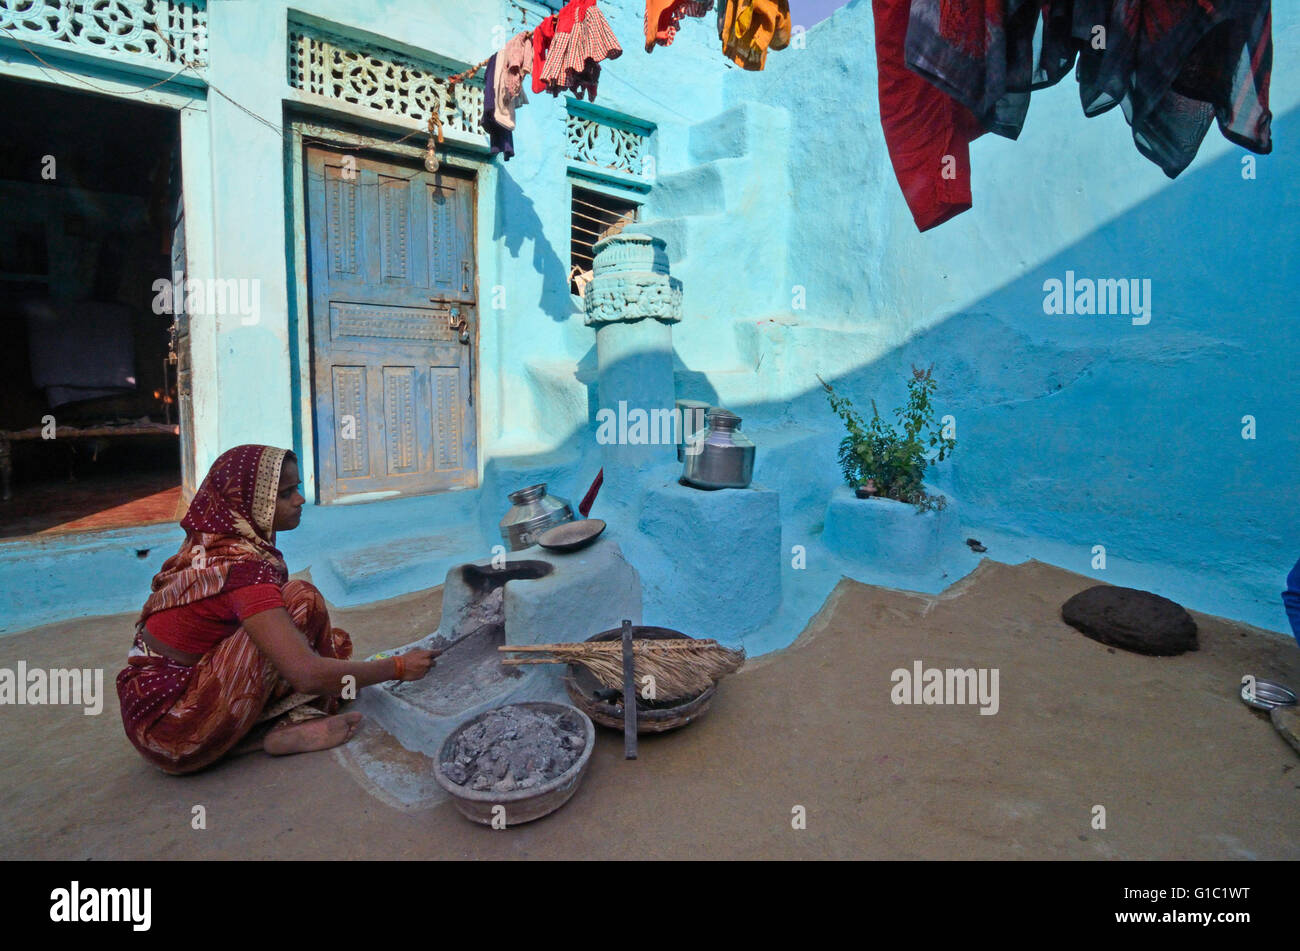 Woman working in the home made mud oven in a village house, Khajuraho village, Madhya Pradesh, India Stock Photo